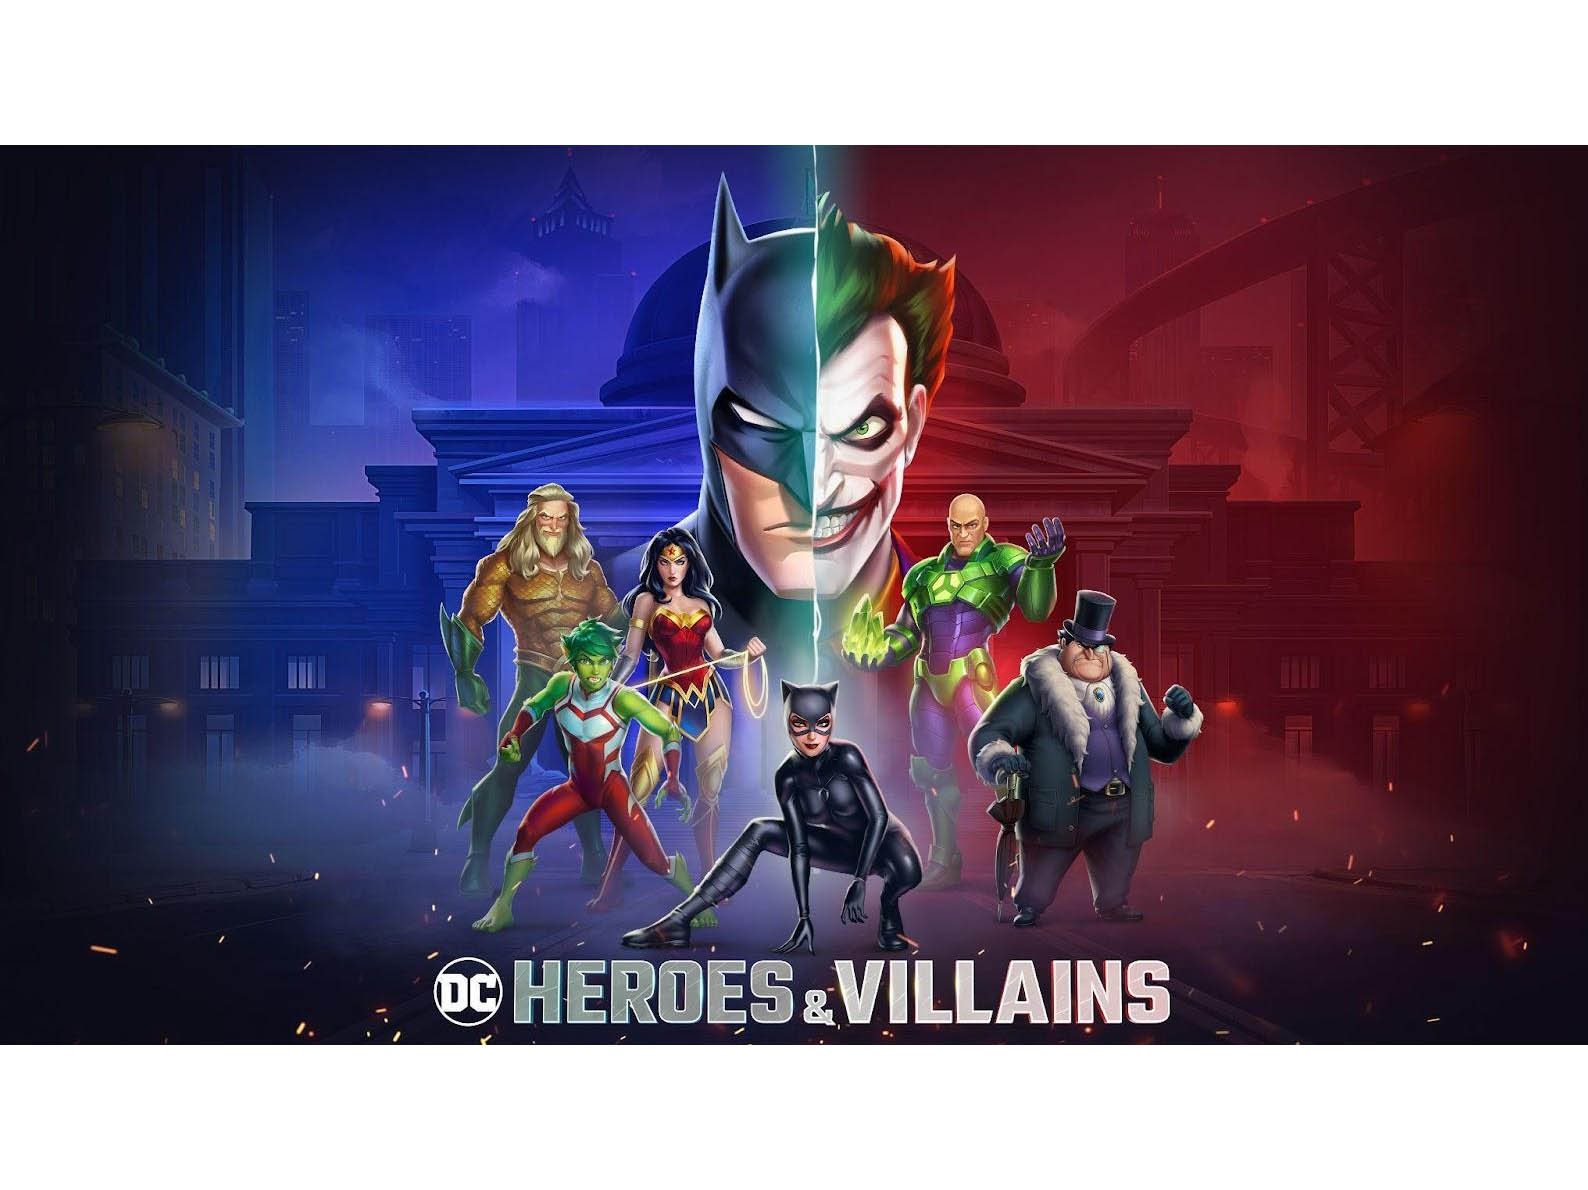 MENA’s Sandsoft partners with Jam City to launch DC Heroes & Villains mobile game